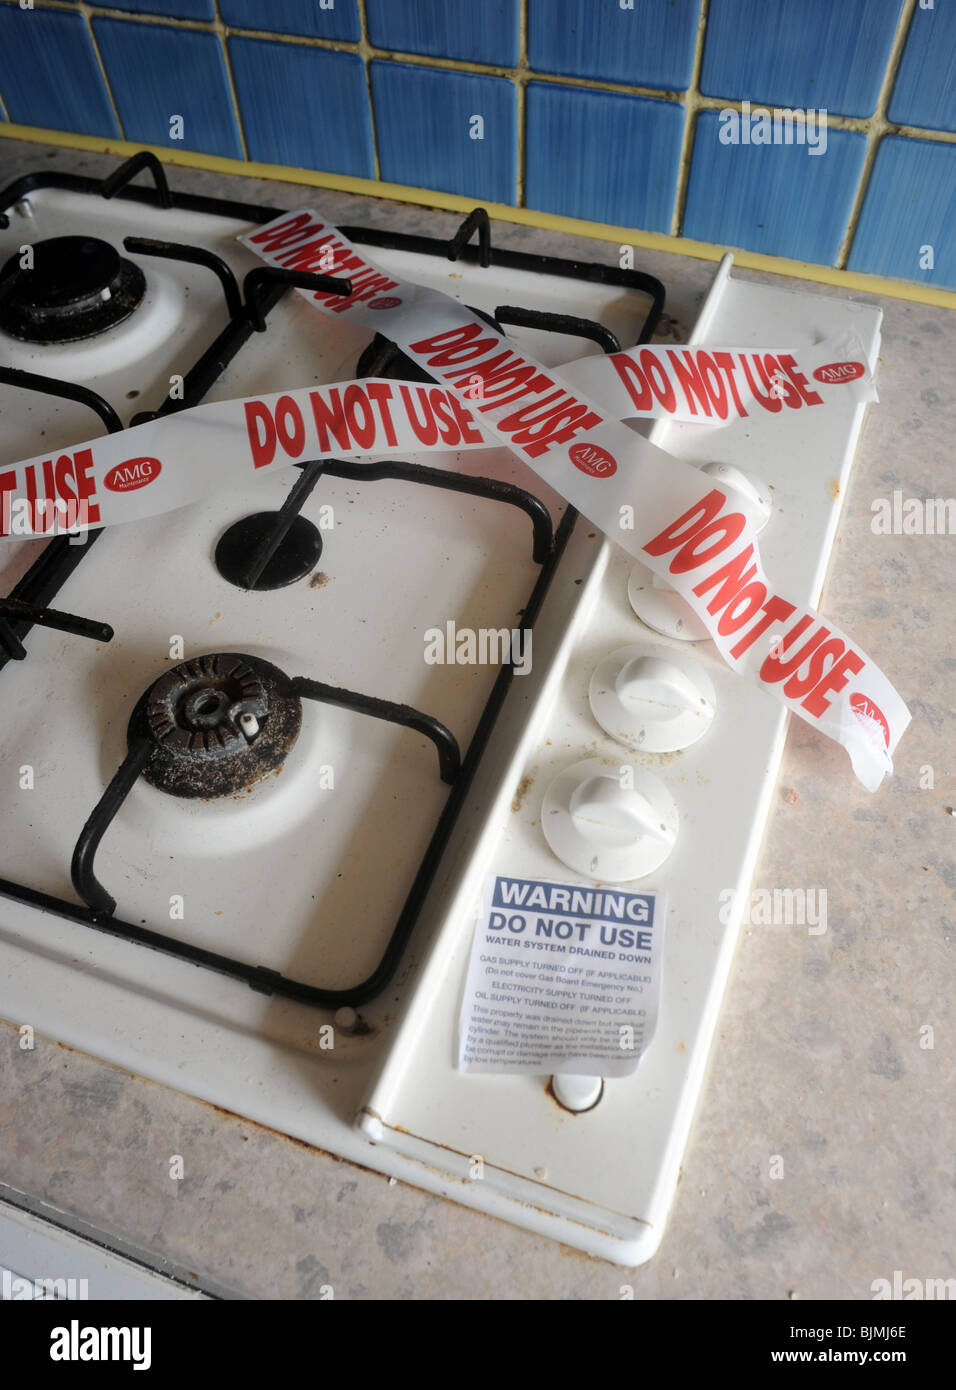 DOMESTIC GAS HOB COOKER WITH 'DO NOT USE' WARNING STICKER TAPE OVER IT,UK Stock Photo